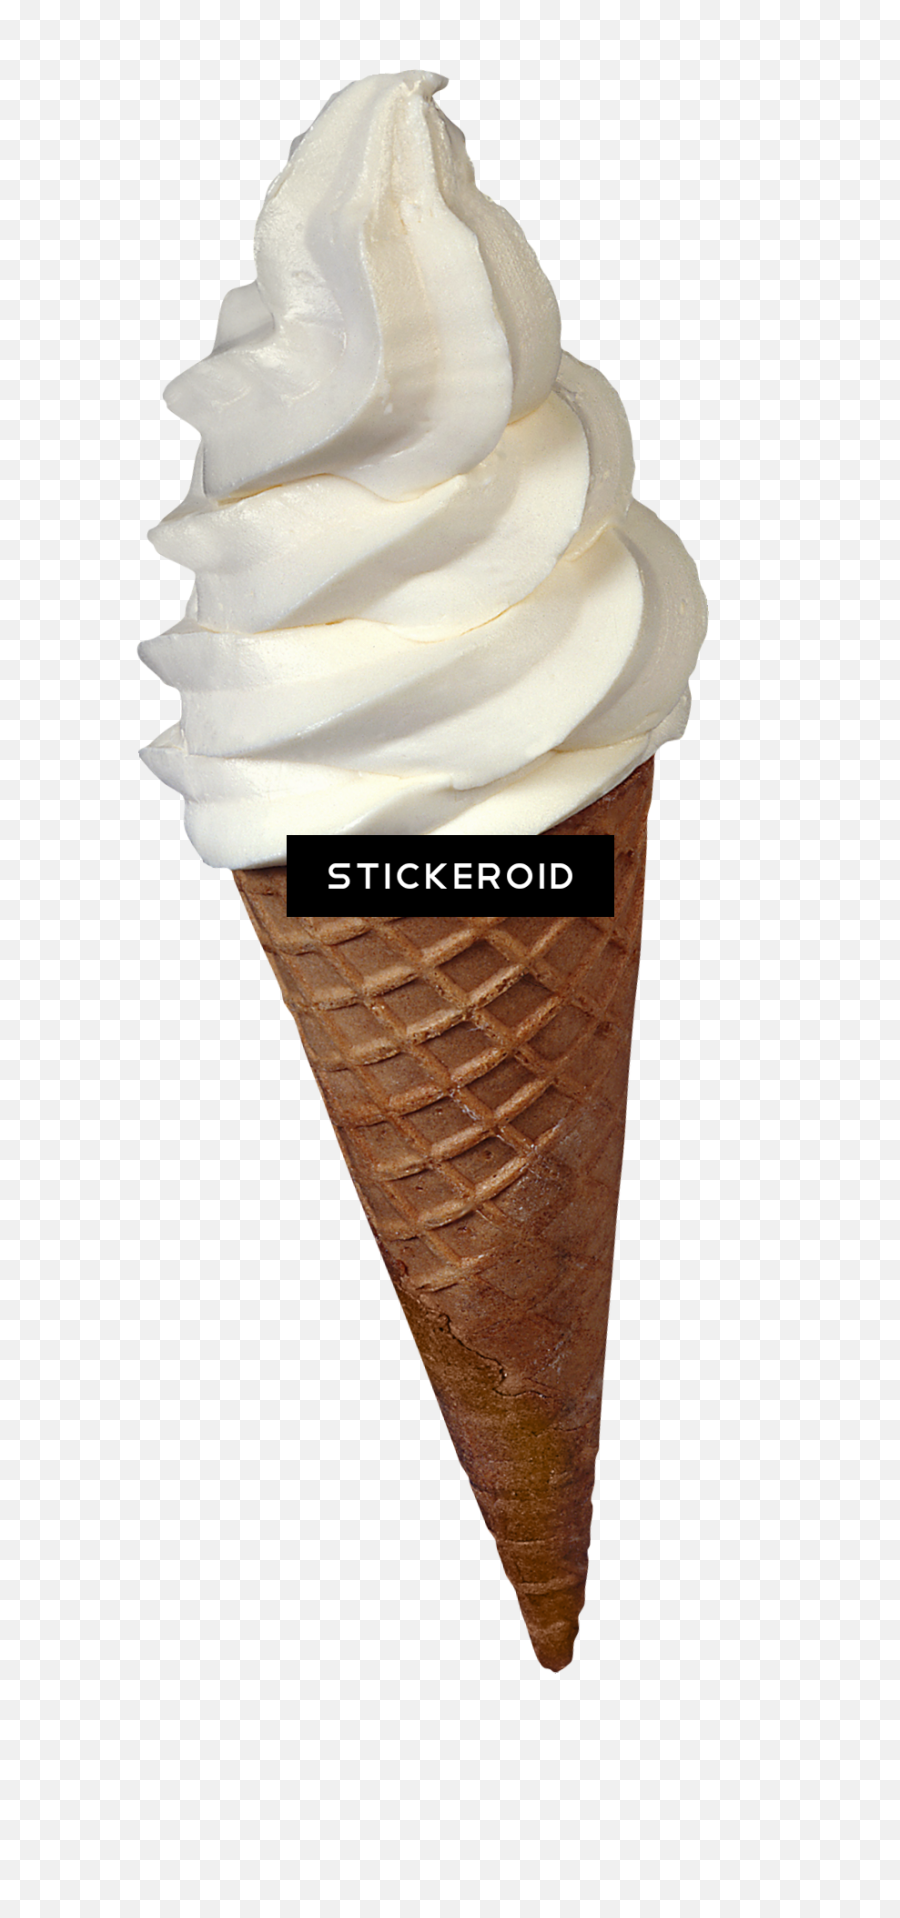 Download Ice Cream Png Image With No Background - Pngkeycom Emoji,Ice Cream Cone Transparent Background